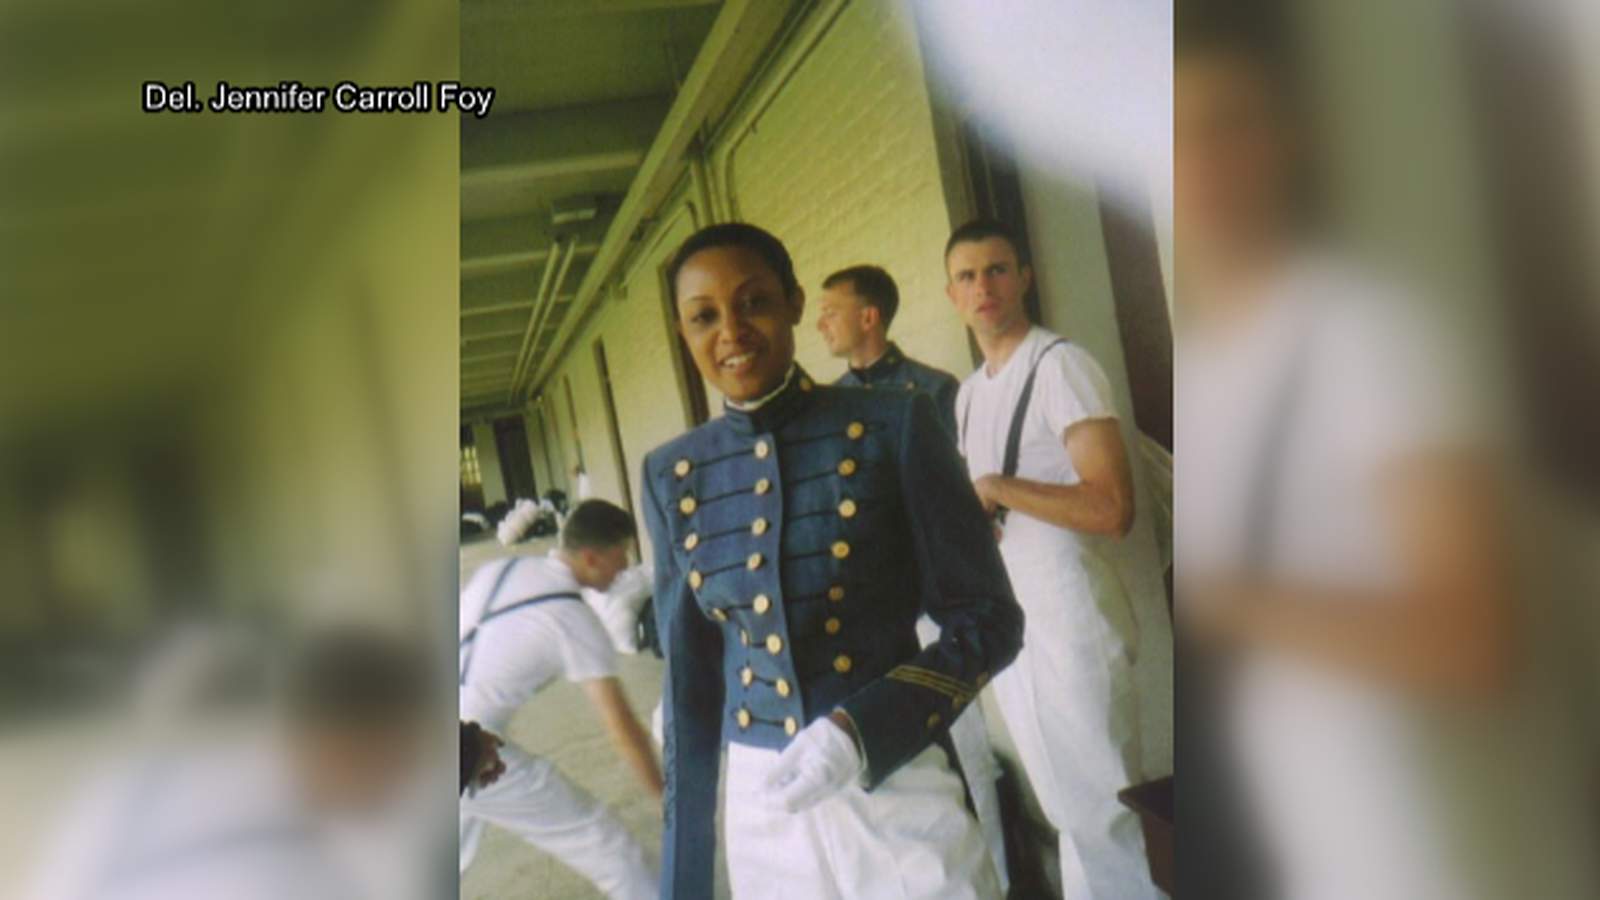 VMI graduate Del. Jennifer Carroll Foy disappointed by school’s response to racism allegations